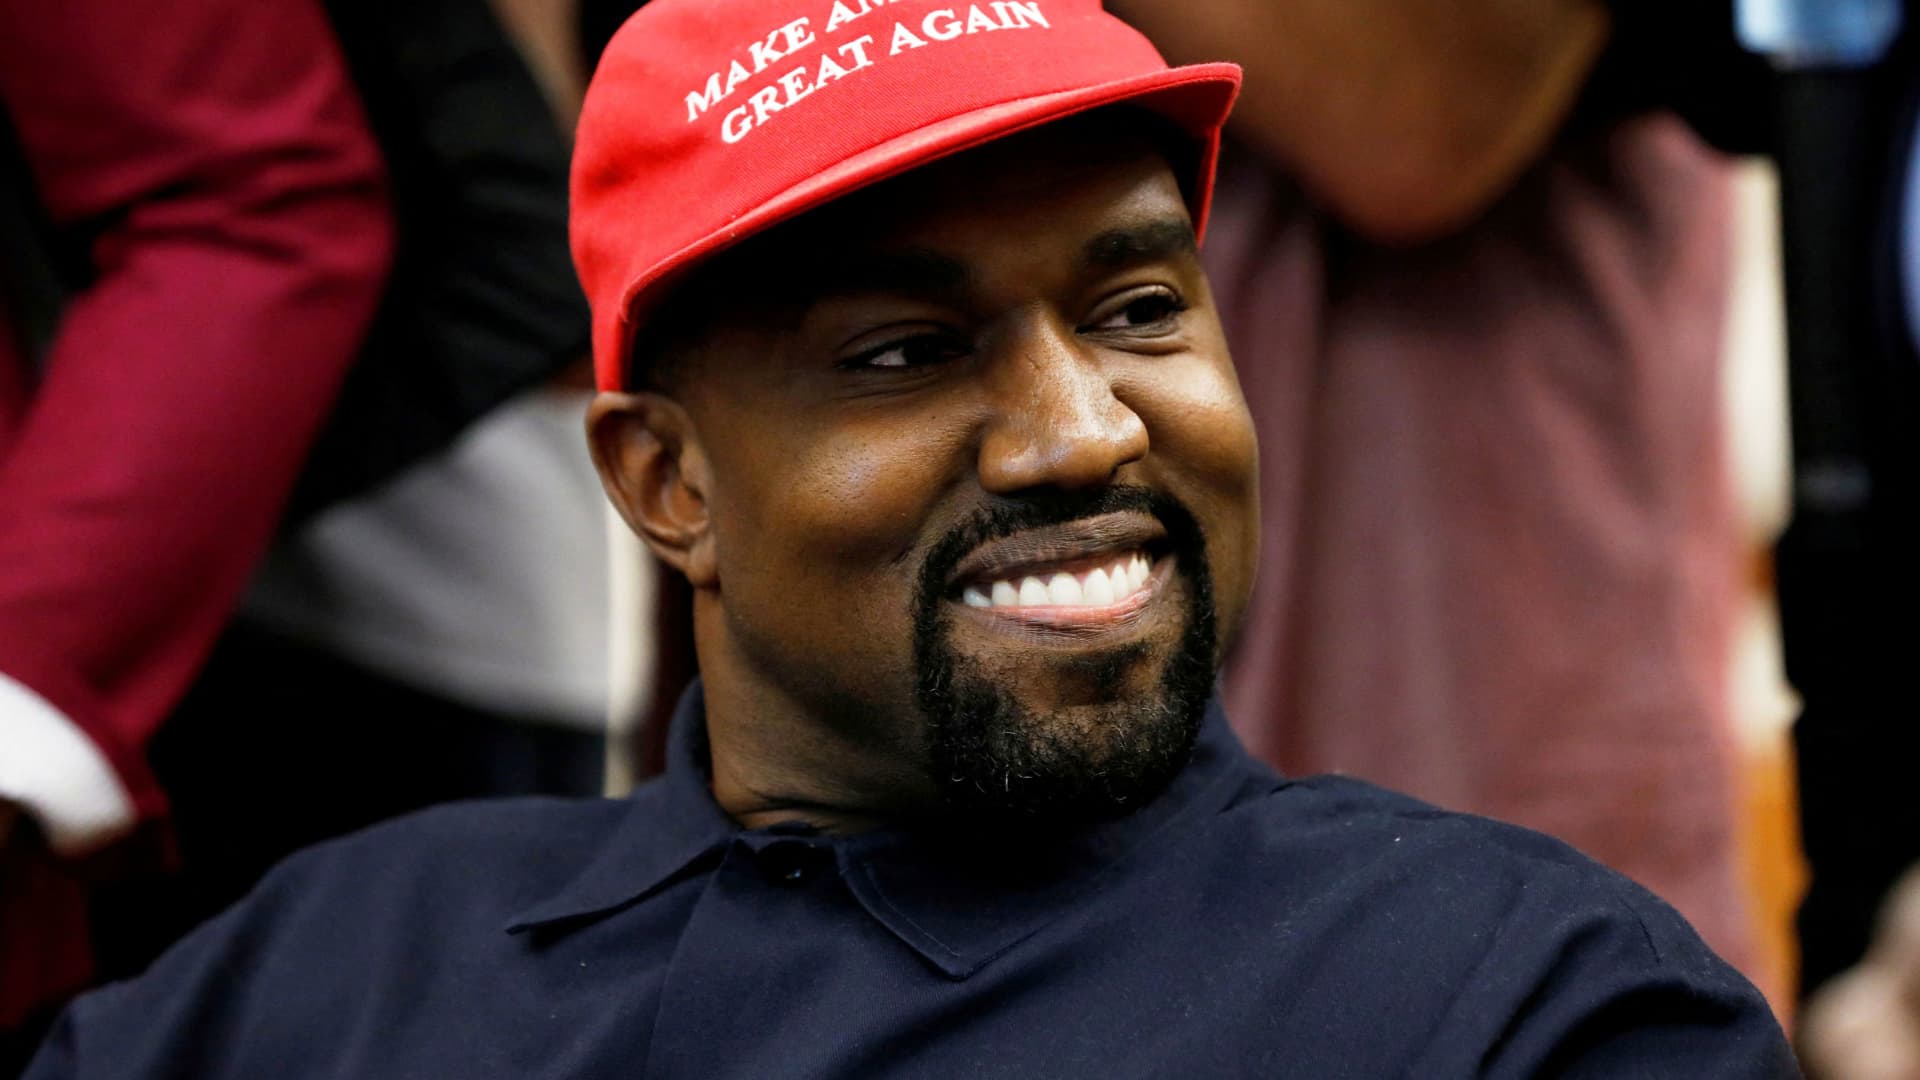 Rapper Kanye West smiles during a meeting with US President Donald Trump to discuss criminal justice reform at the White House in Washington, October 11, 2018.